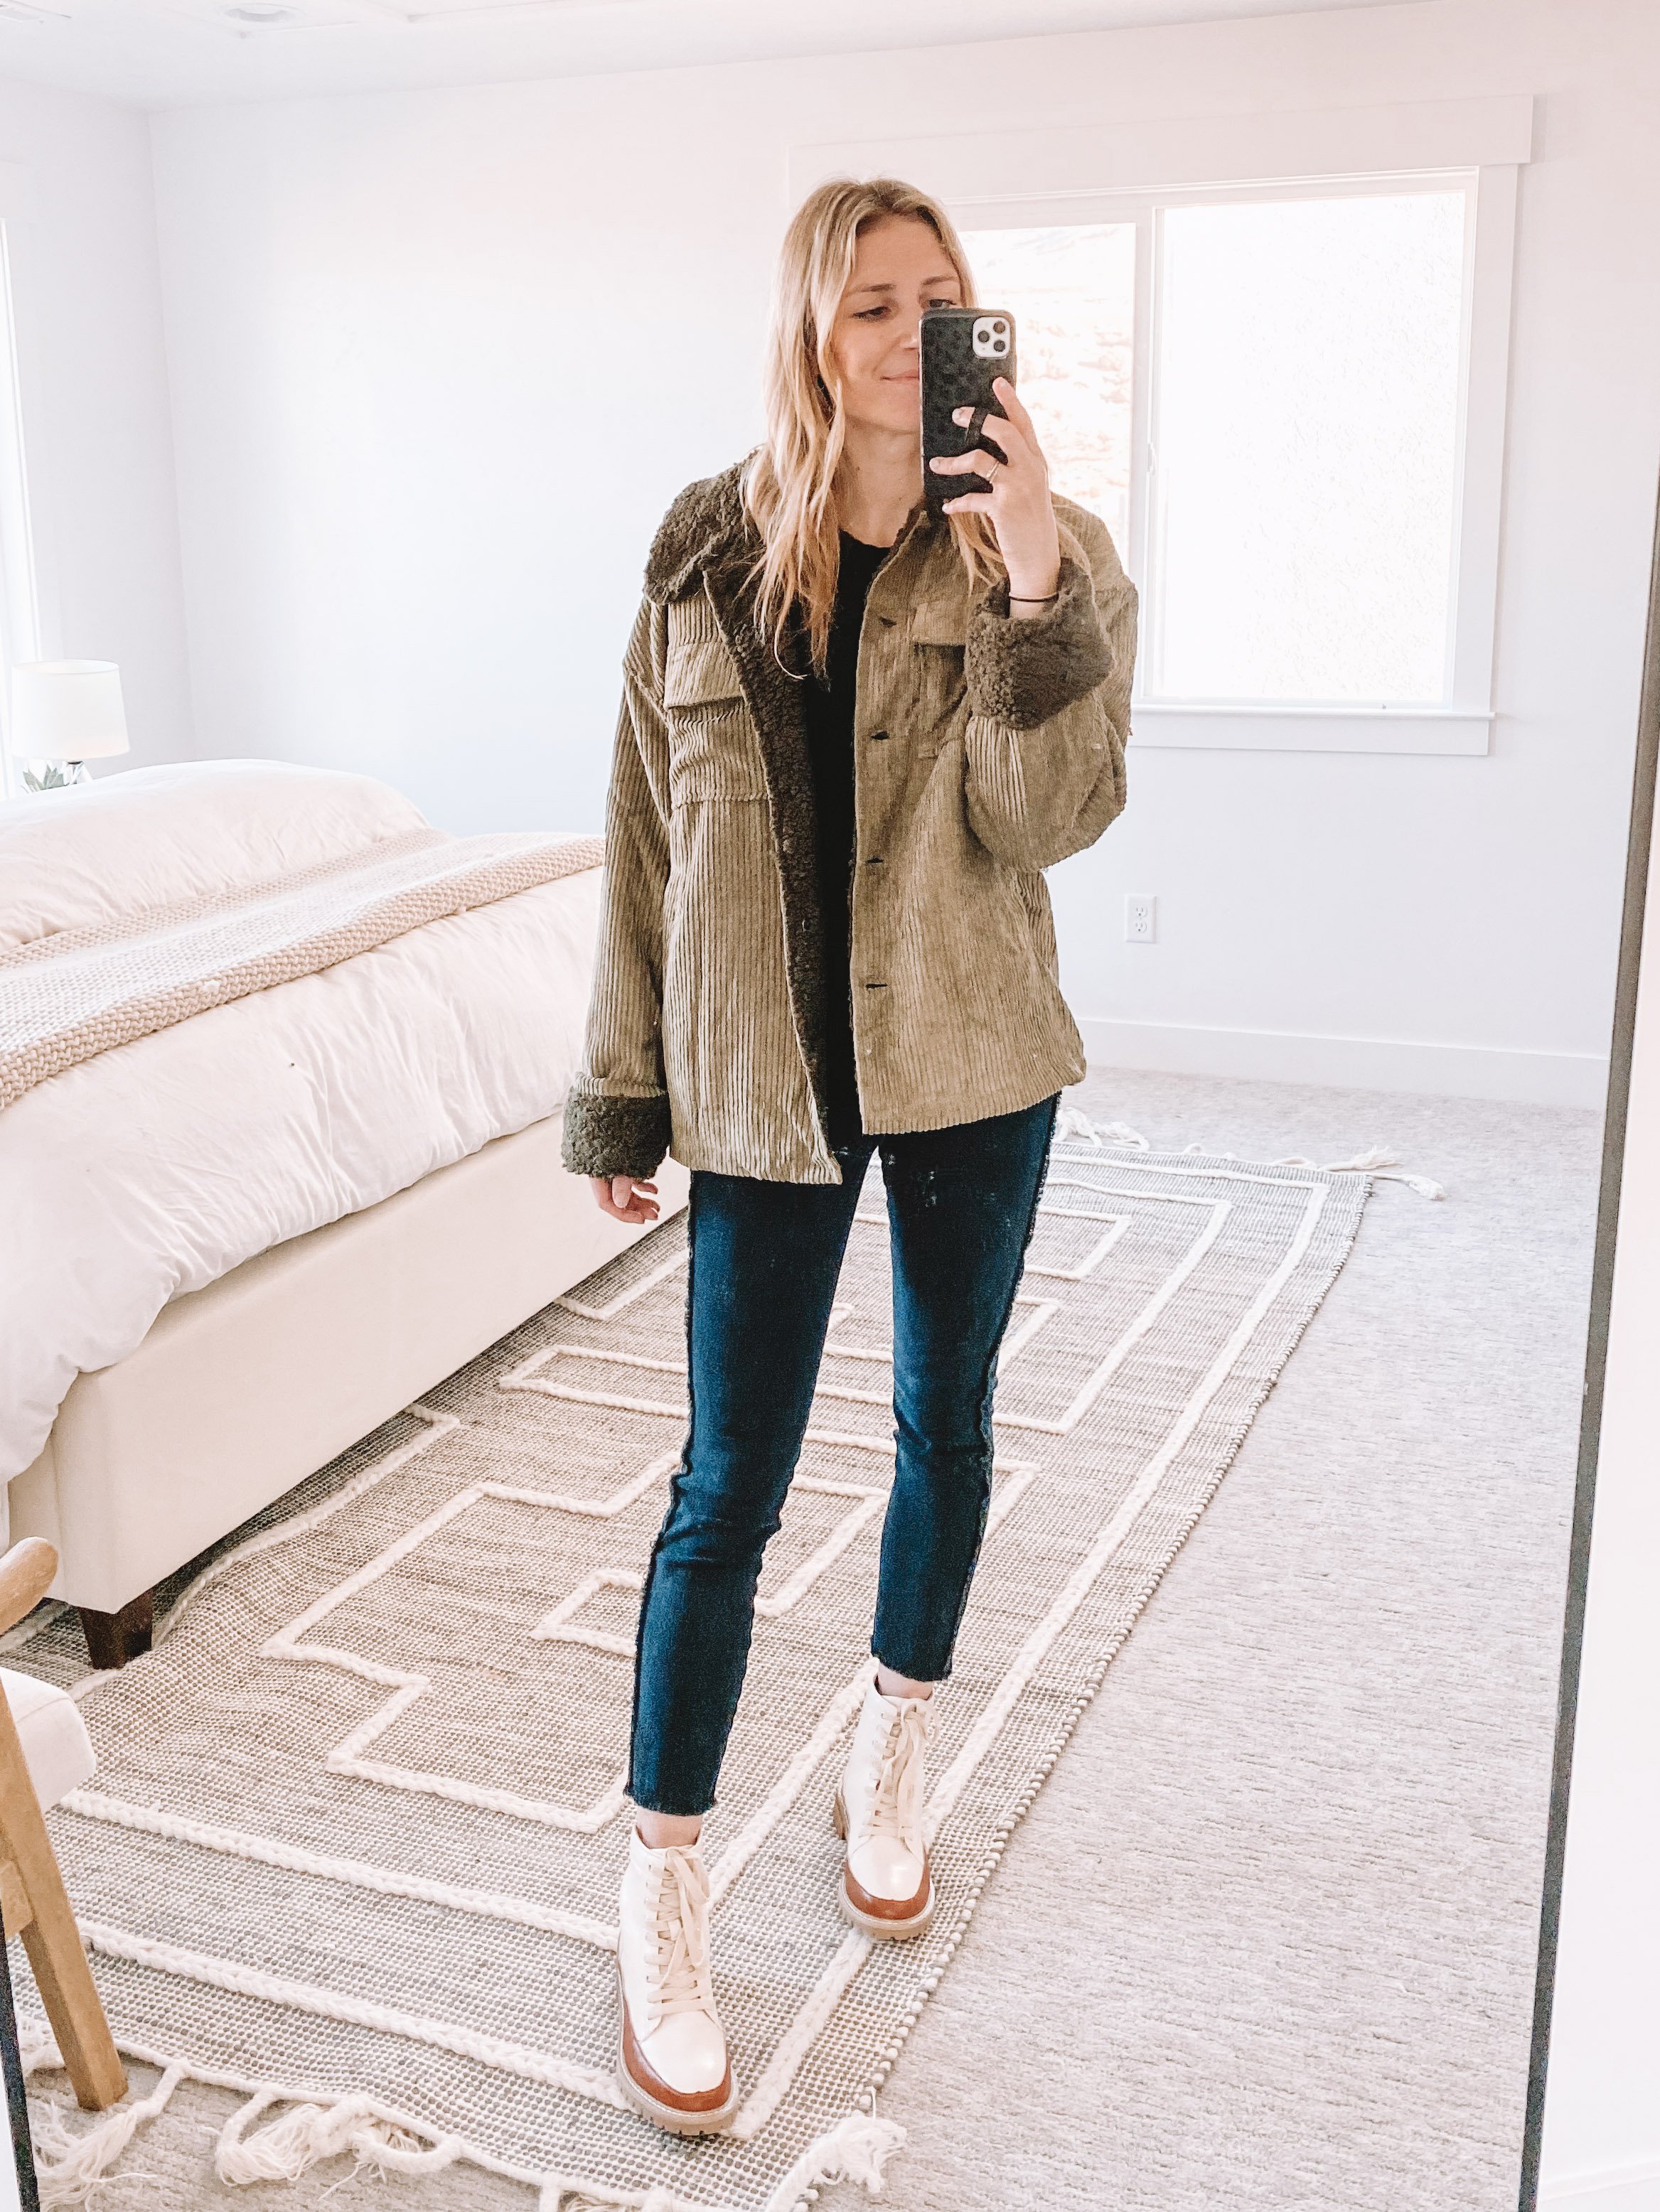 Winter Fashion | Women's Sweaters + Jackets — The Overwhelmed Mommy Blog